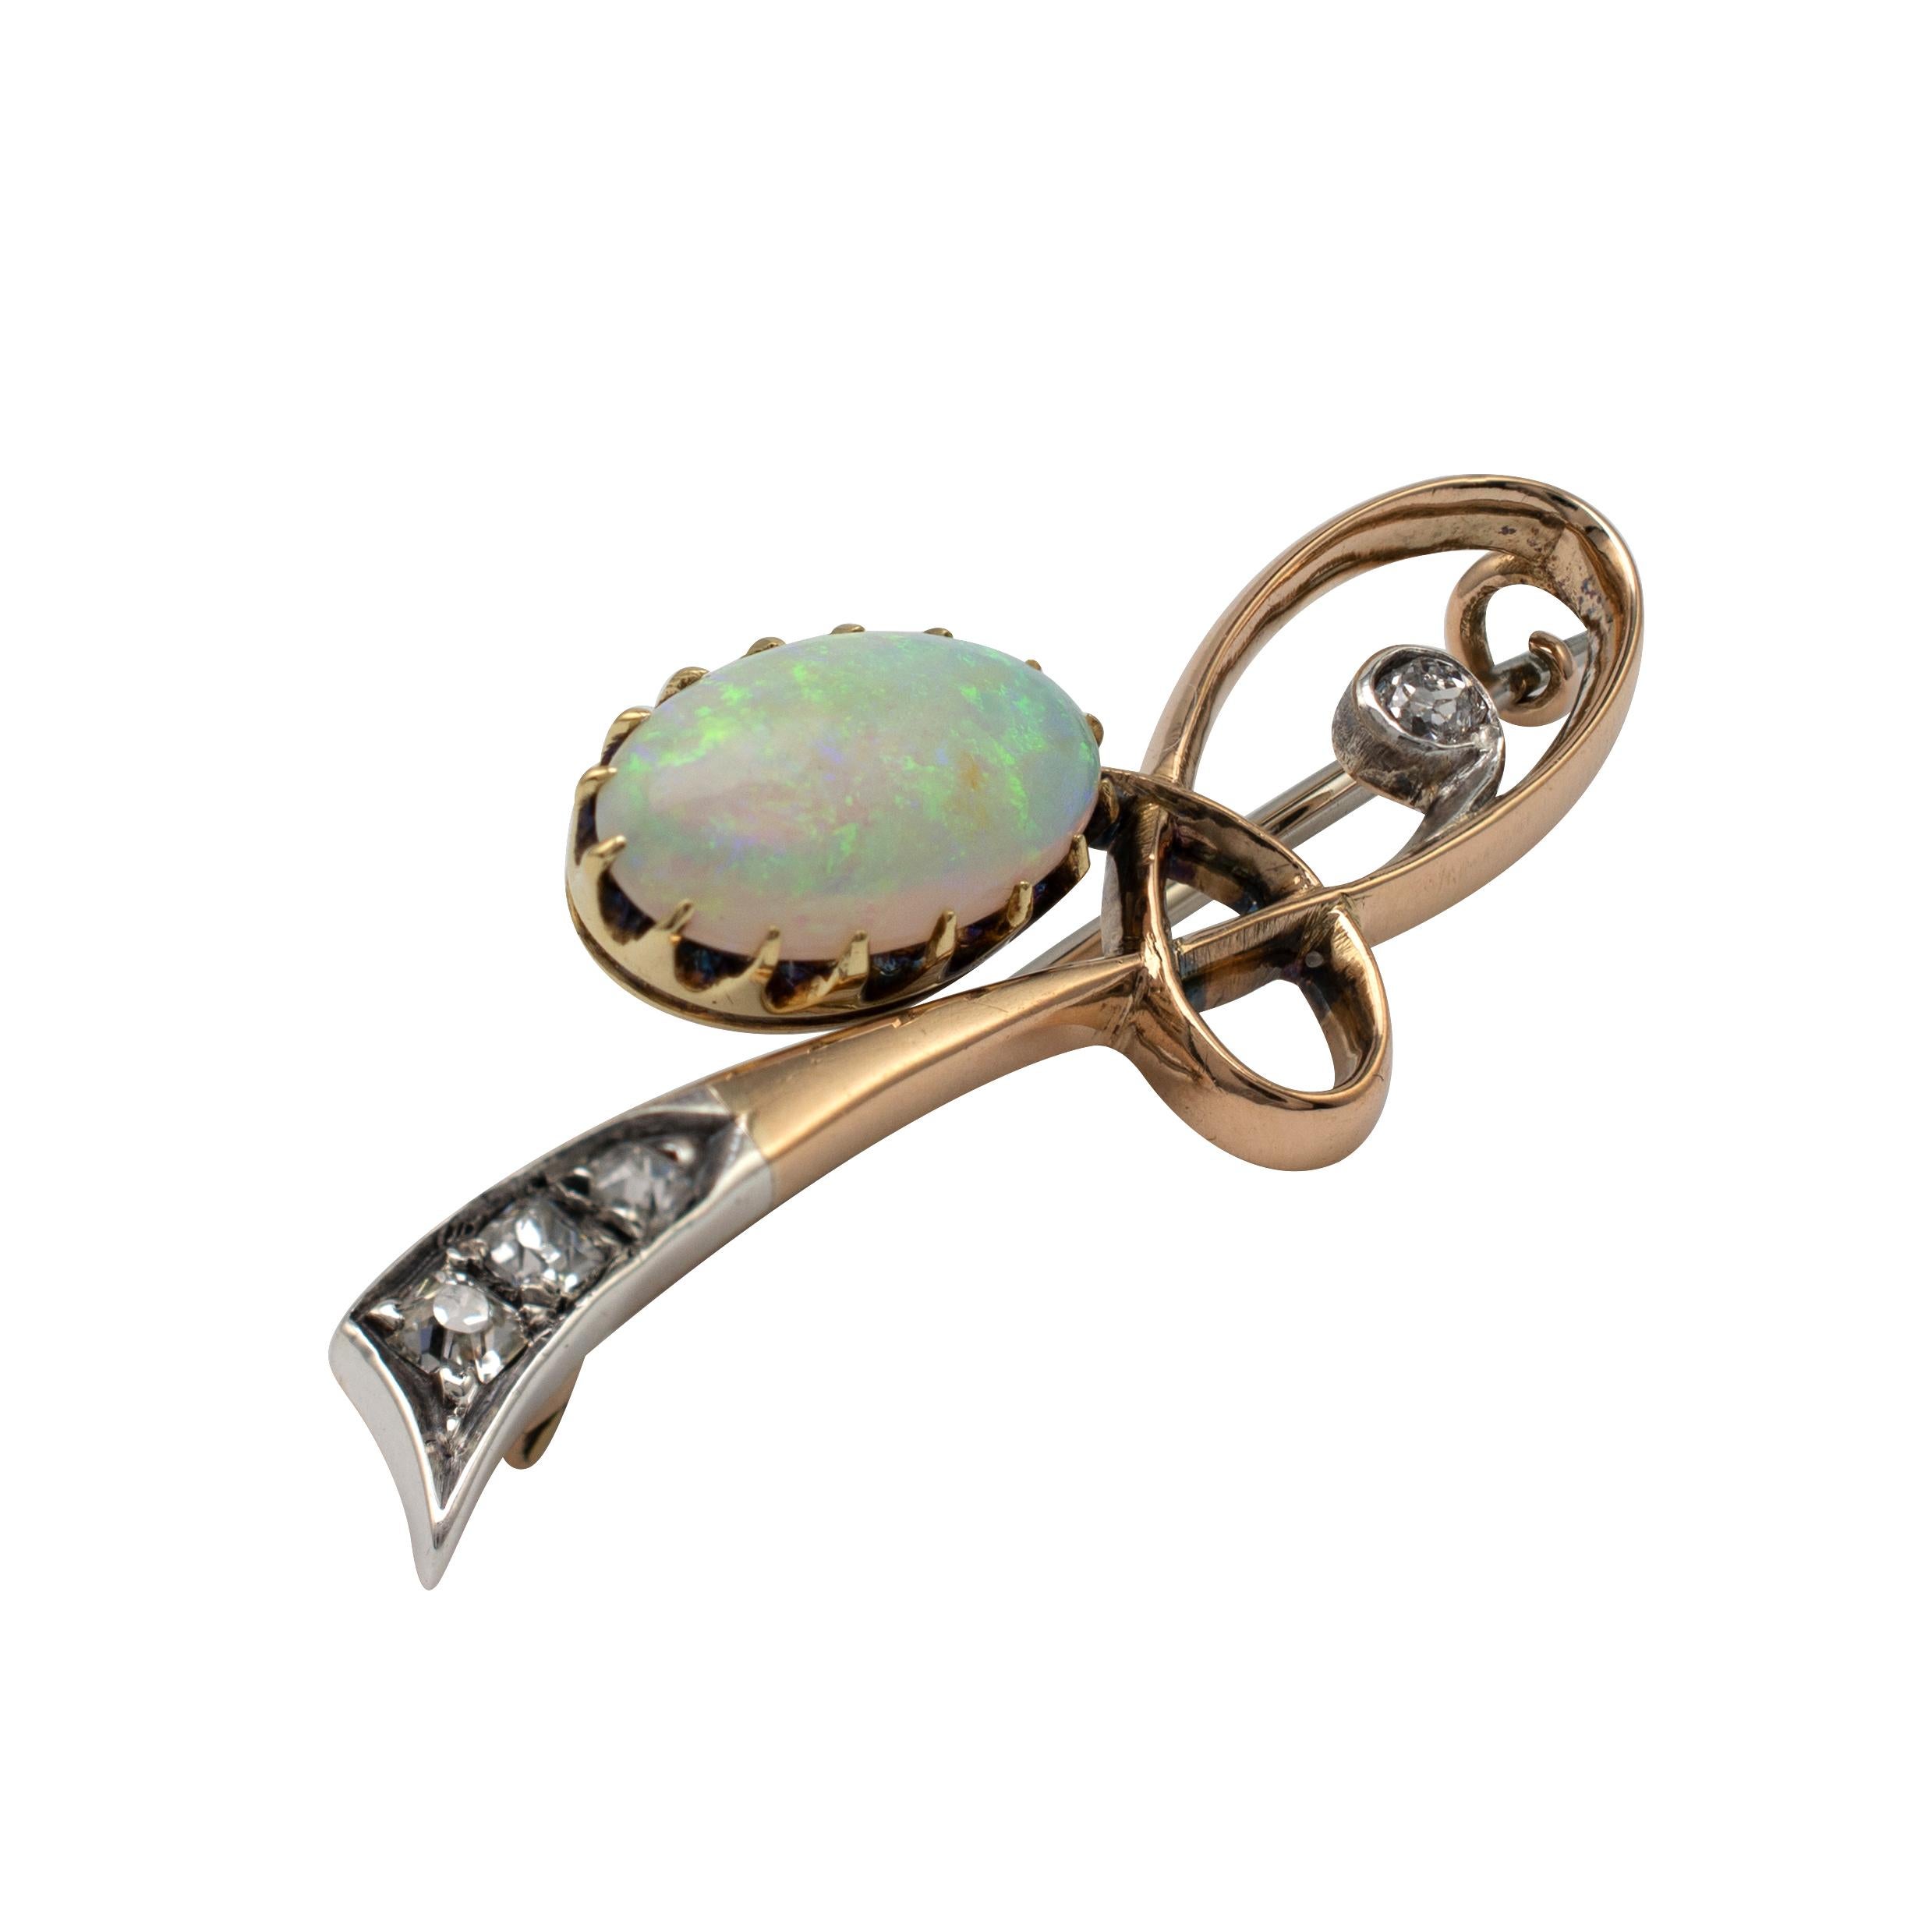 This exemplary Art Nouveau Opal and diamond fruit brooch is beautifully crafted in 9 karat rose gold and features the most impressive large natural opal. Circa 1890-1900

The brooch is beautiful in shape with graduated gold loop leading to a